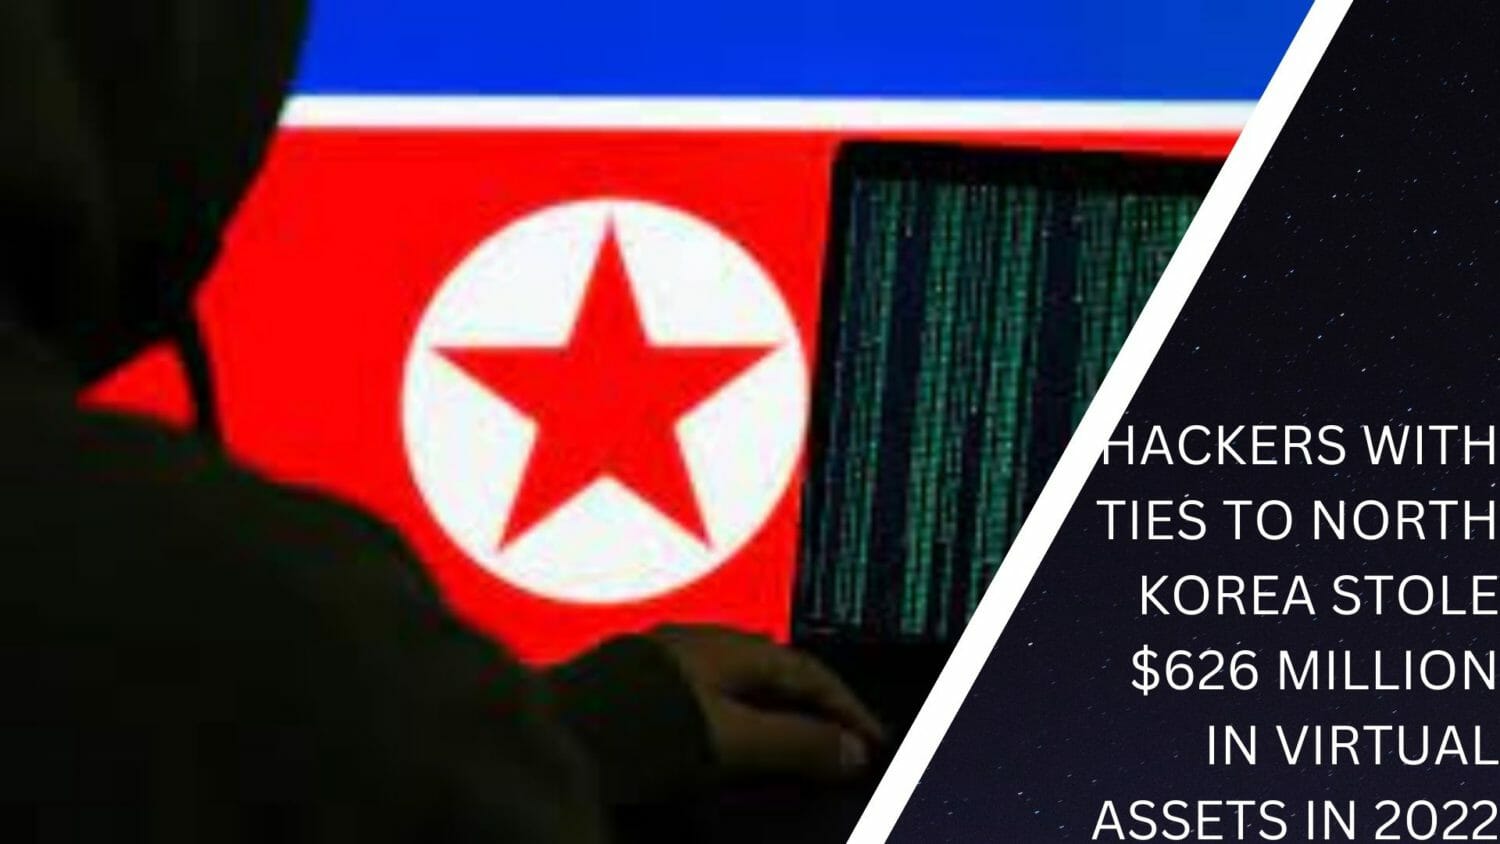 Hackers With Ties To North Korea Stole $626 Million In Virtual Assets In 2022